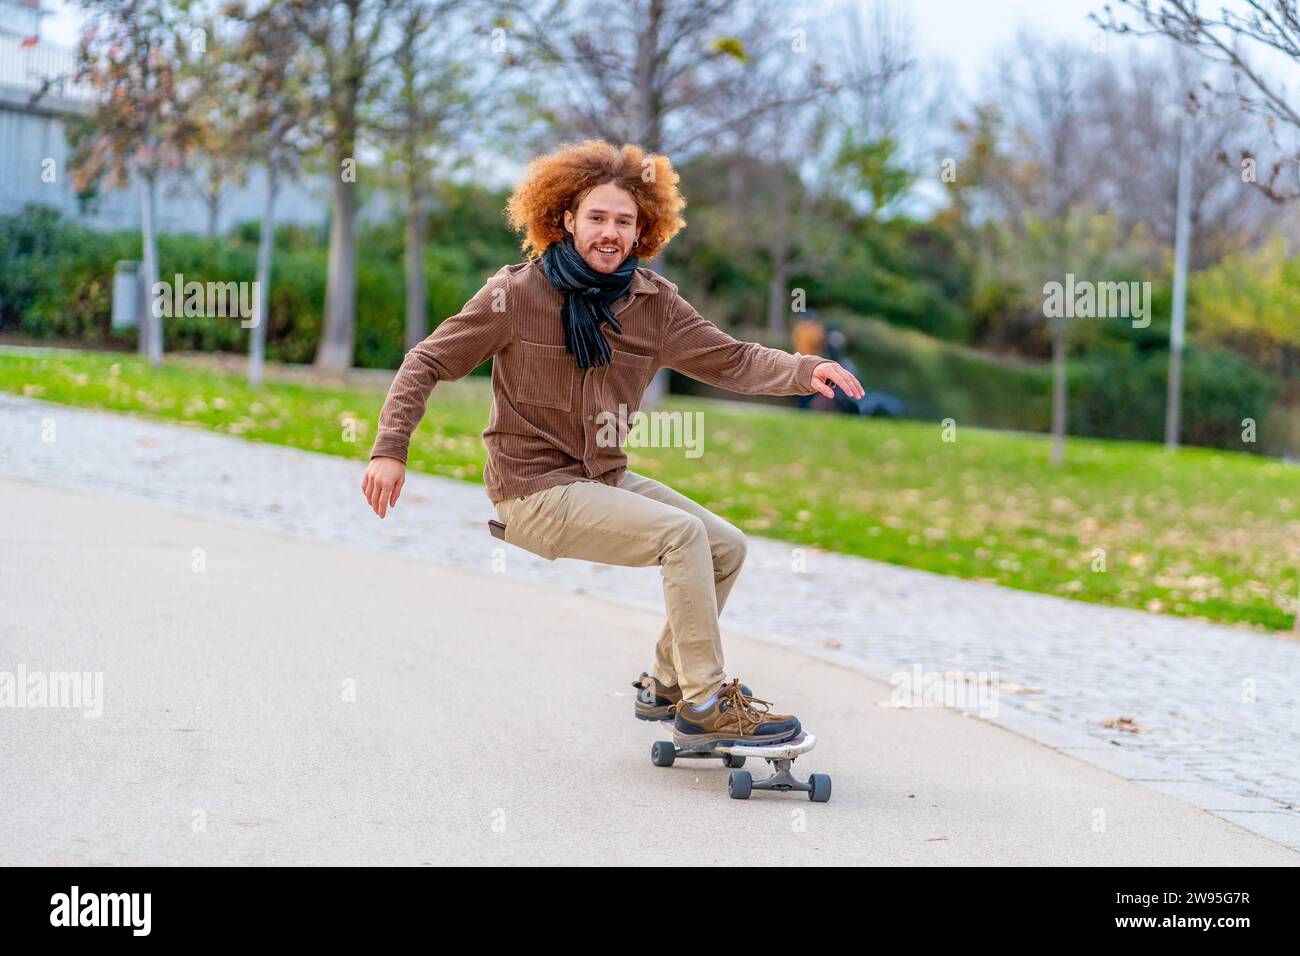 Photo with motion and copy space of a happy young man skateboarding in an urban park Stock Photo